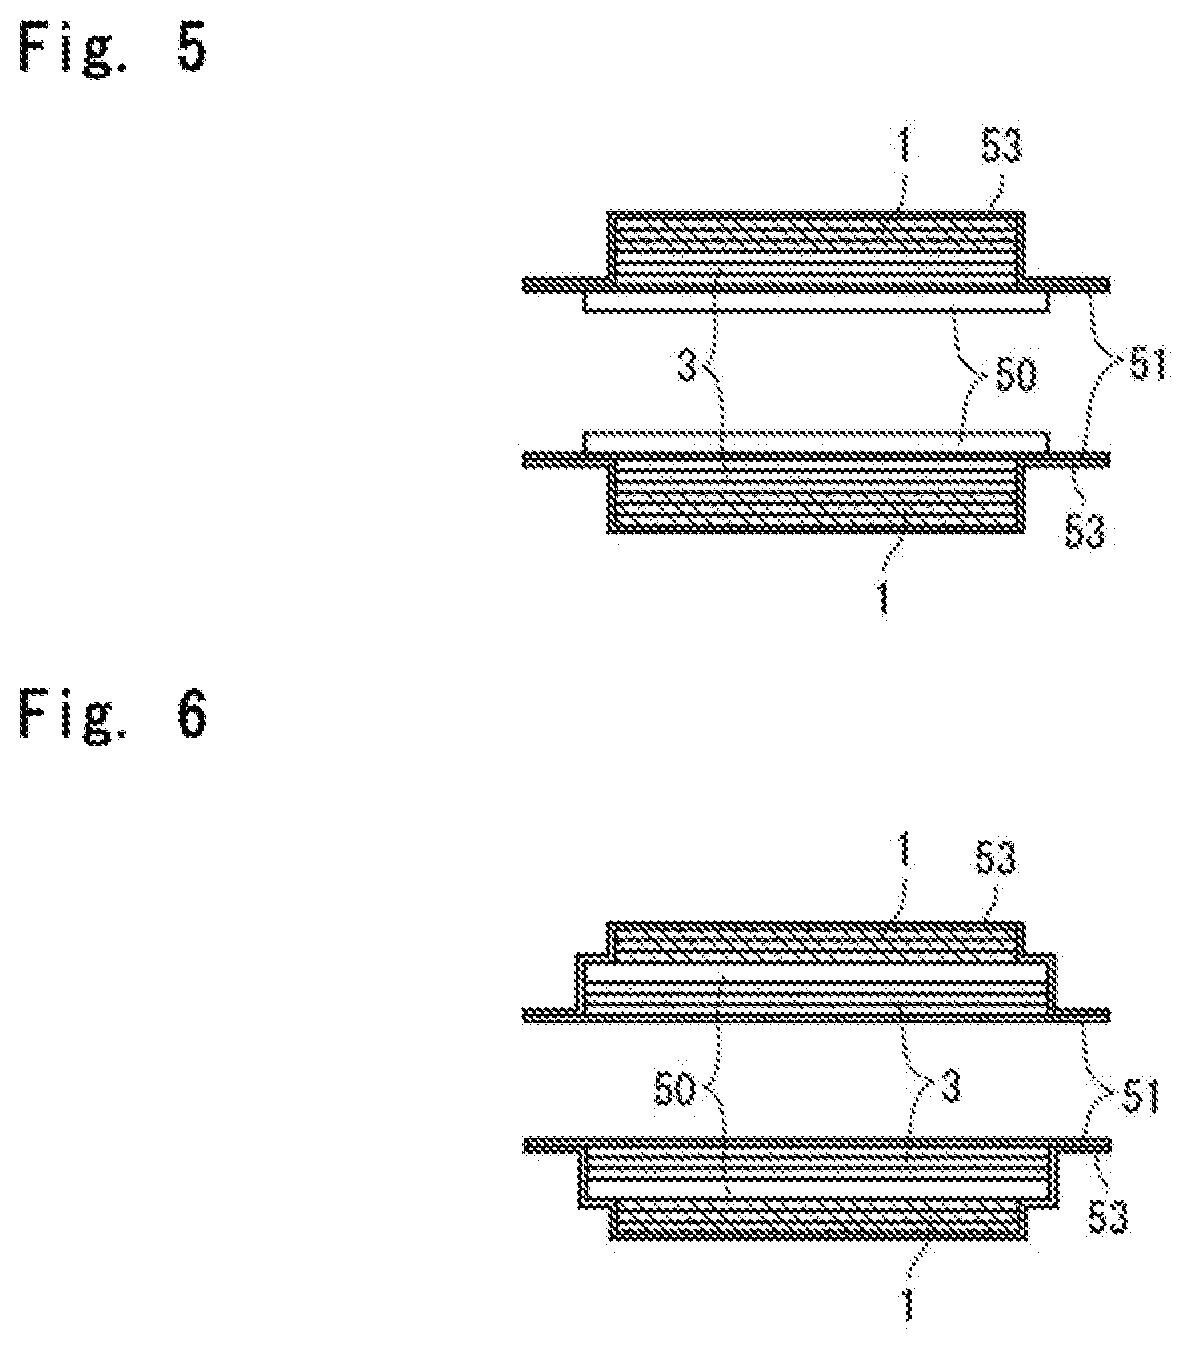 Packaged barrier film for electronic devices